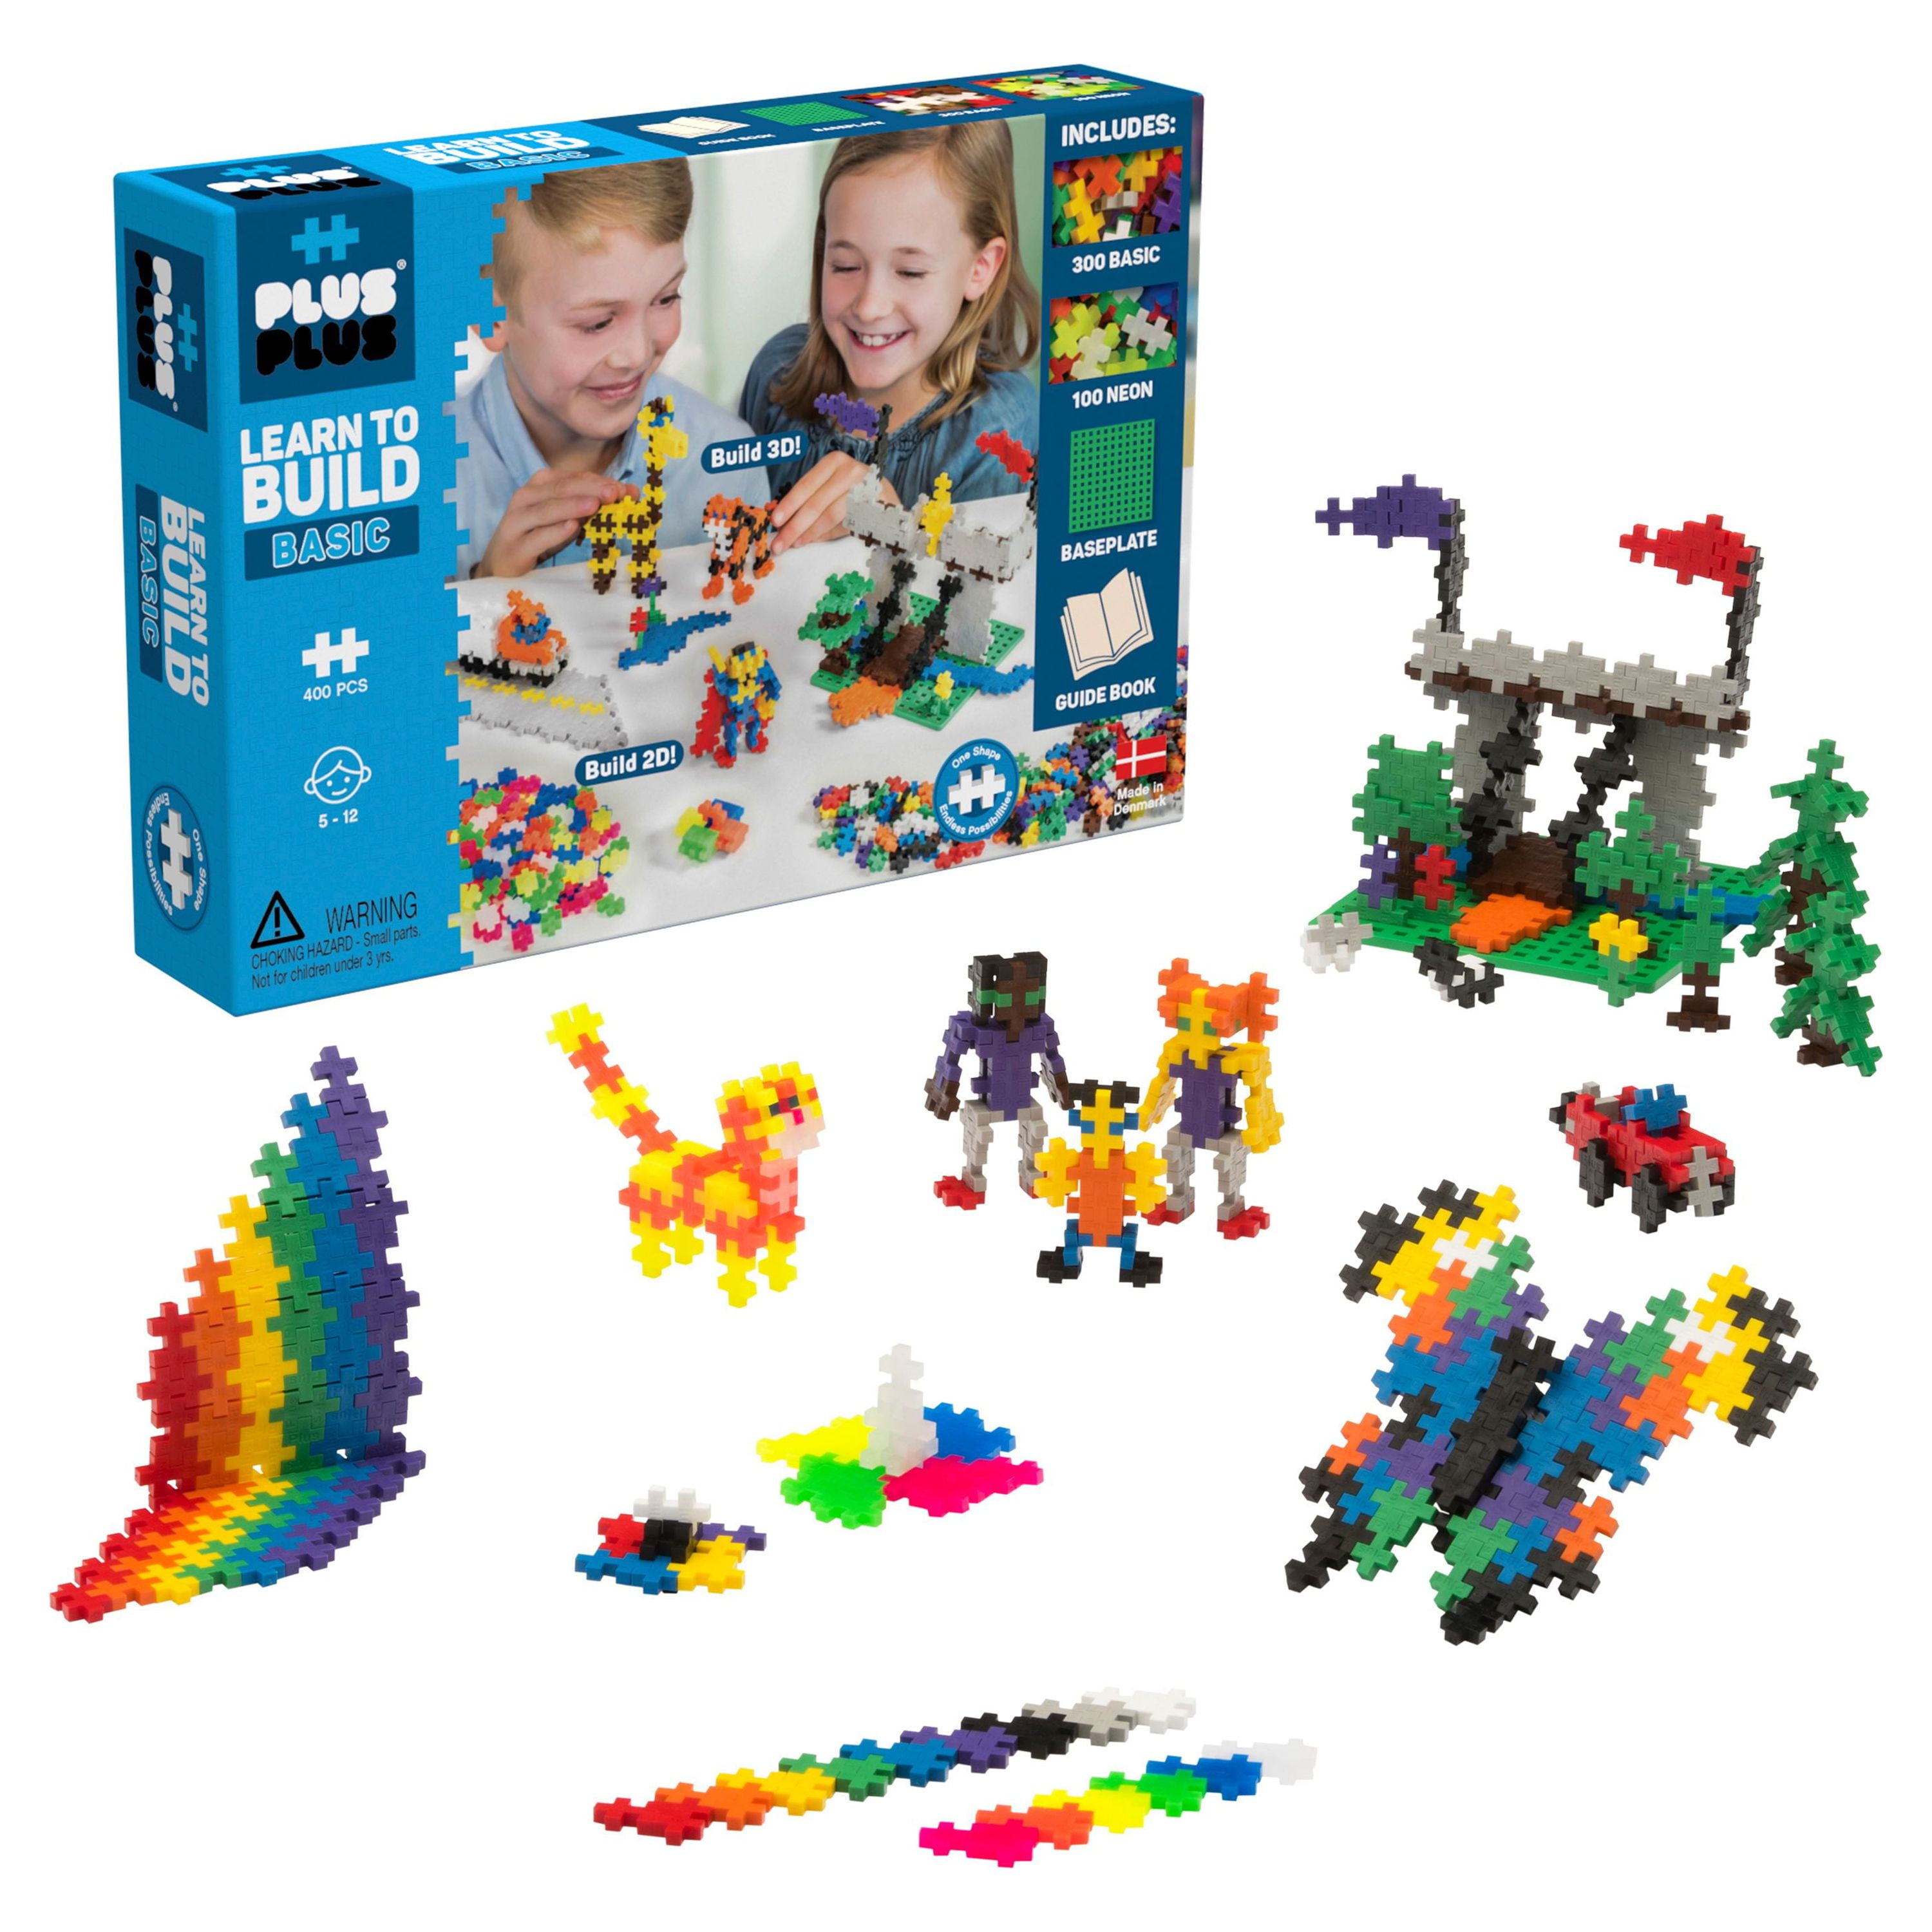 Foam Brick Building Block Set - Actual Brick Size, for Construction and  Stacking (Set of 25)